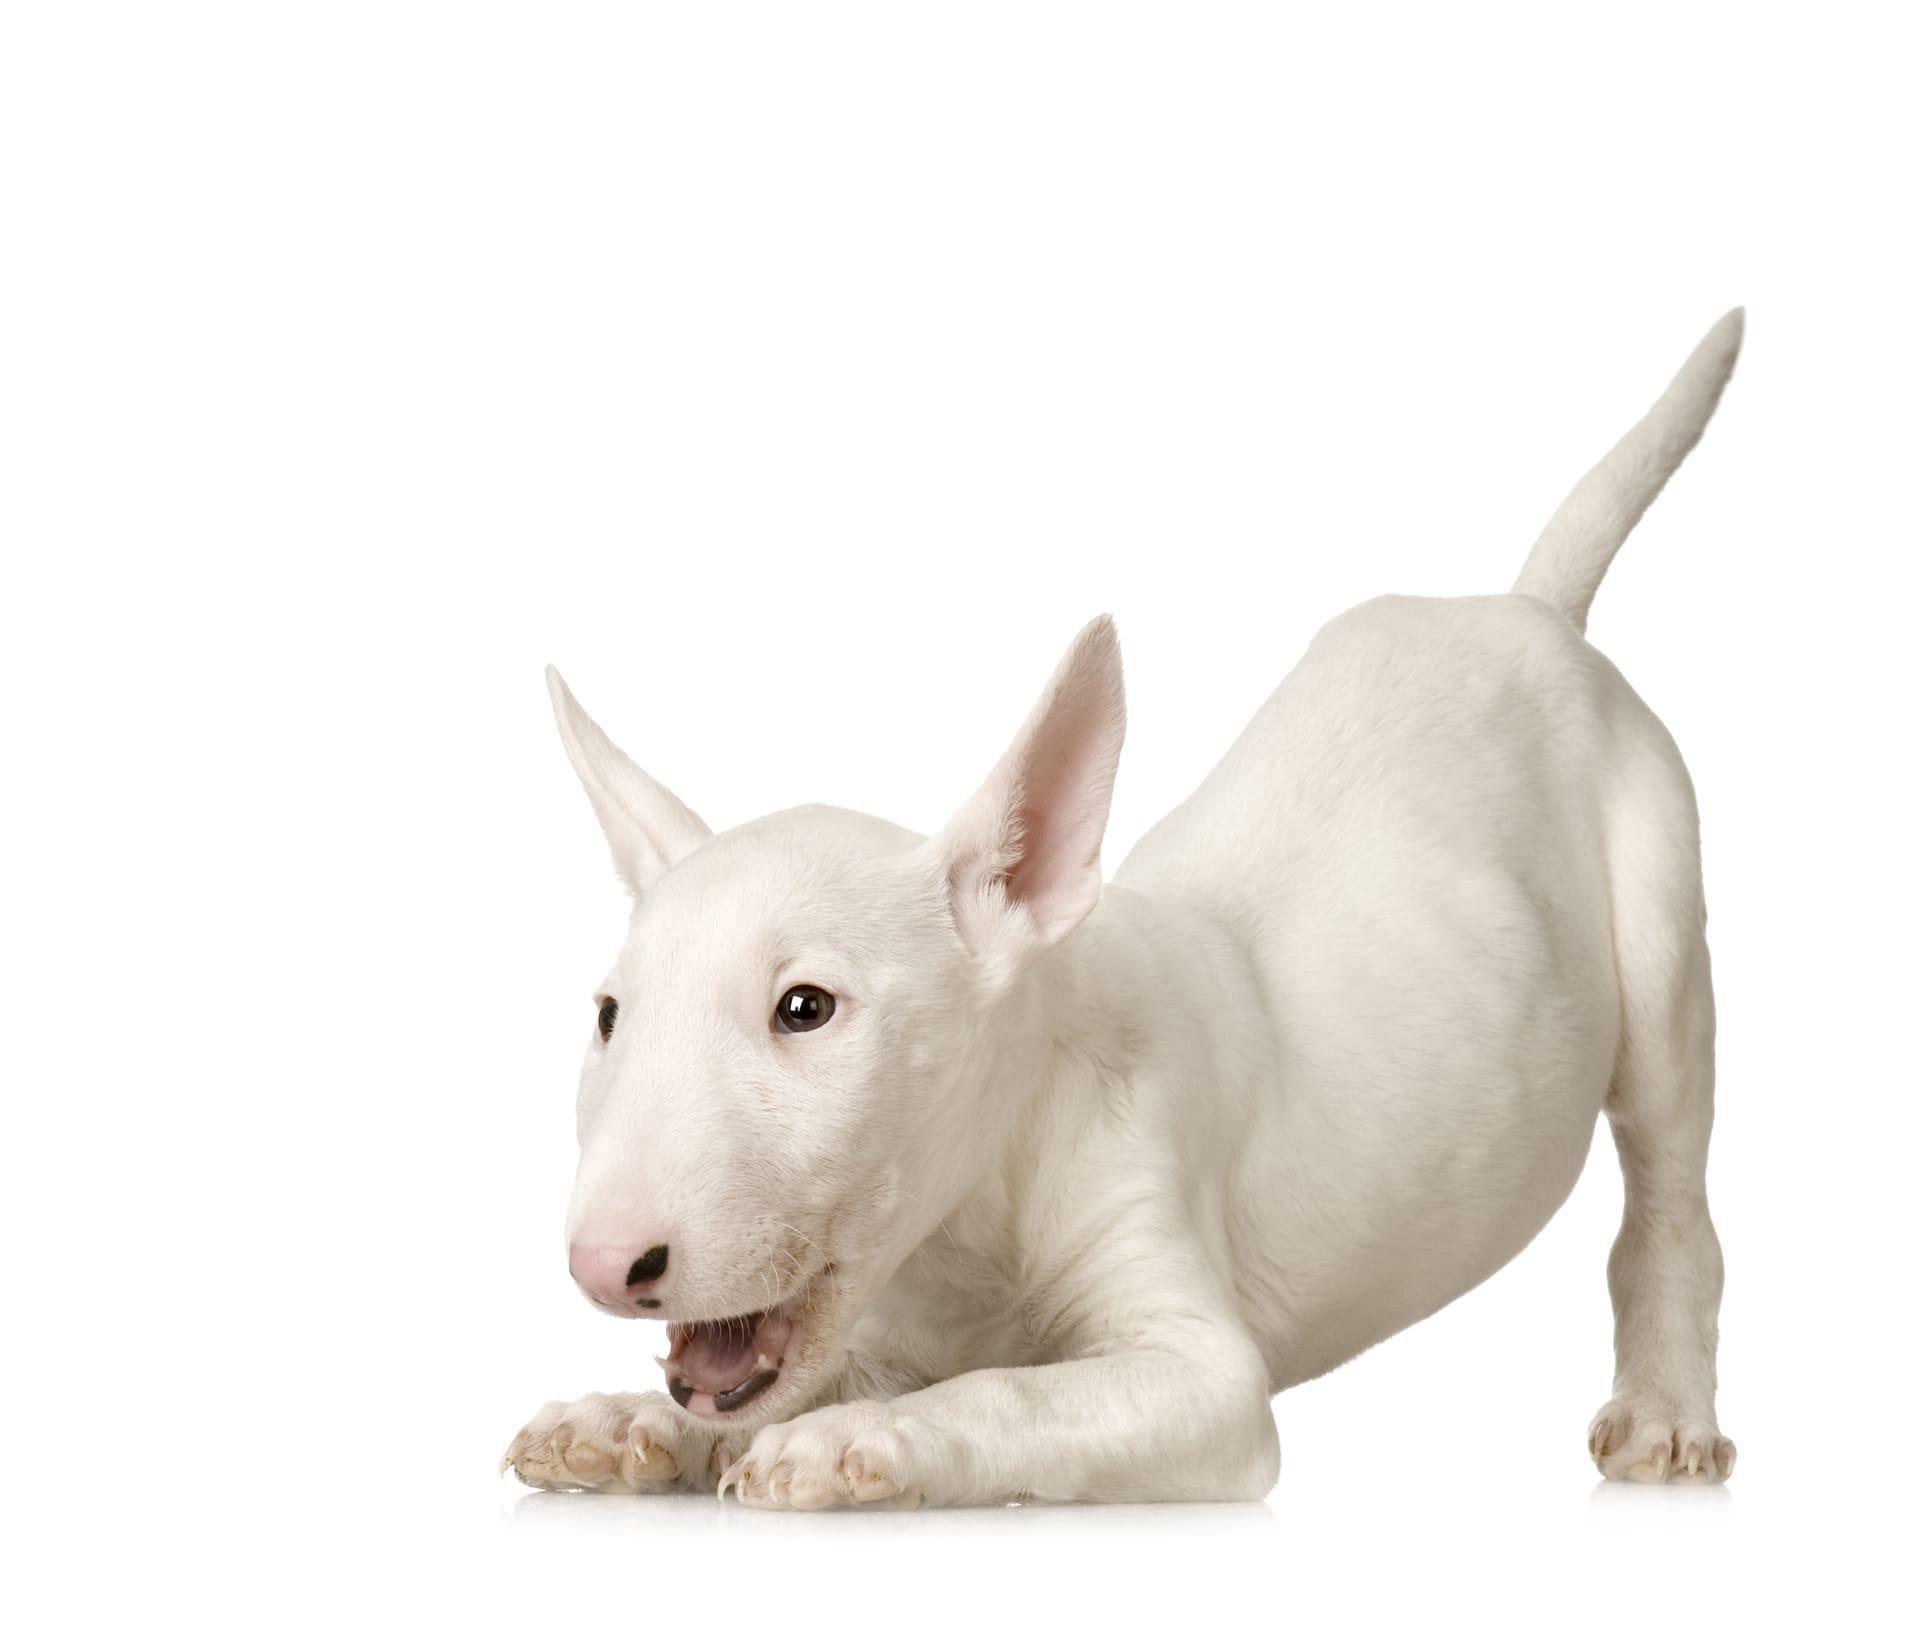 Bull terrier pictures